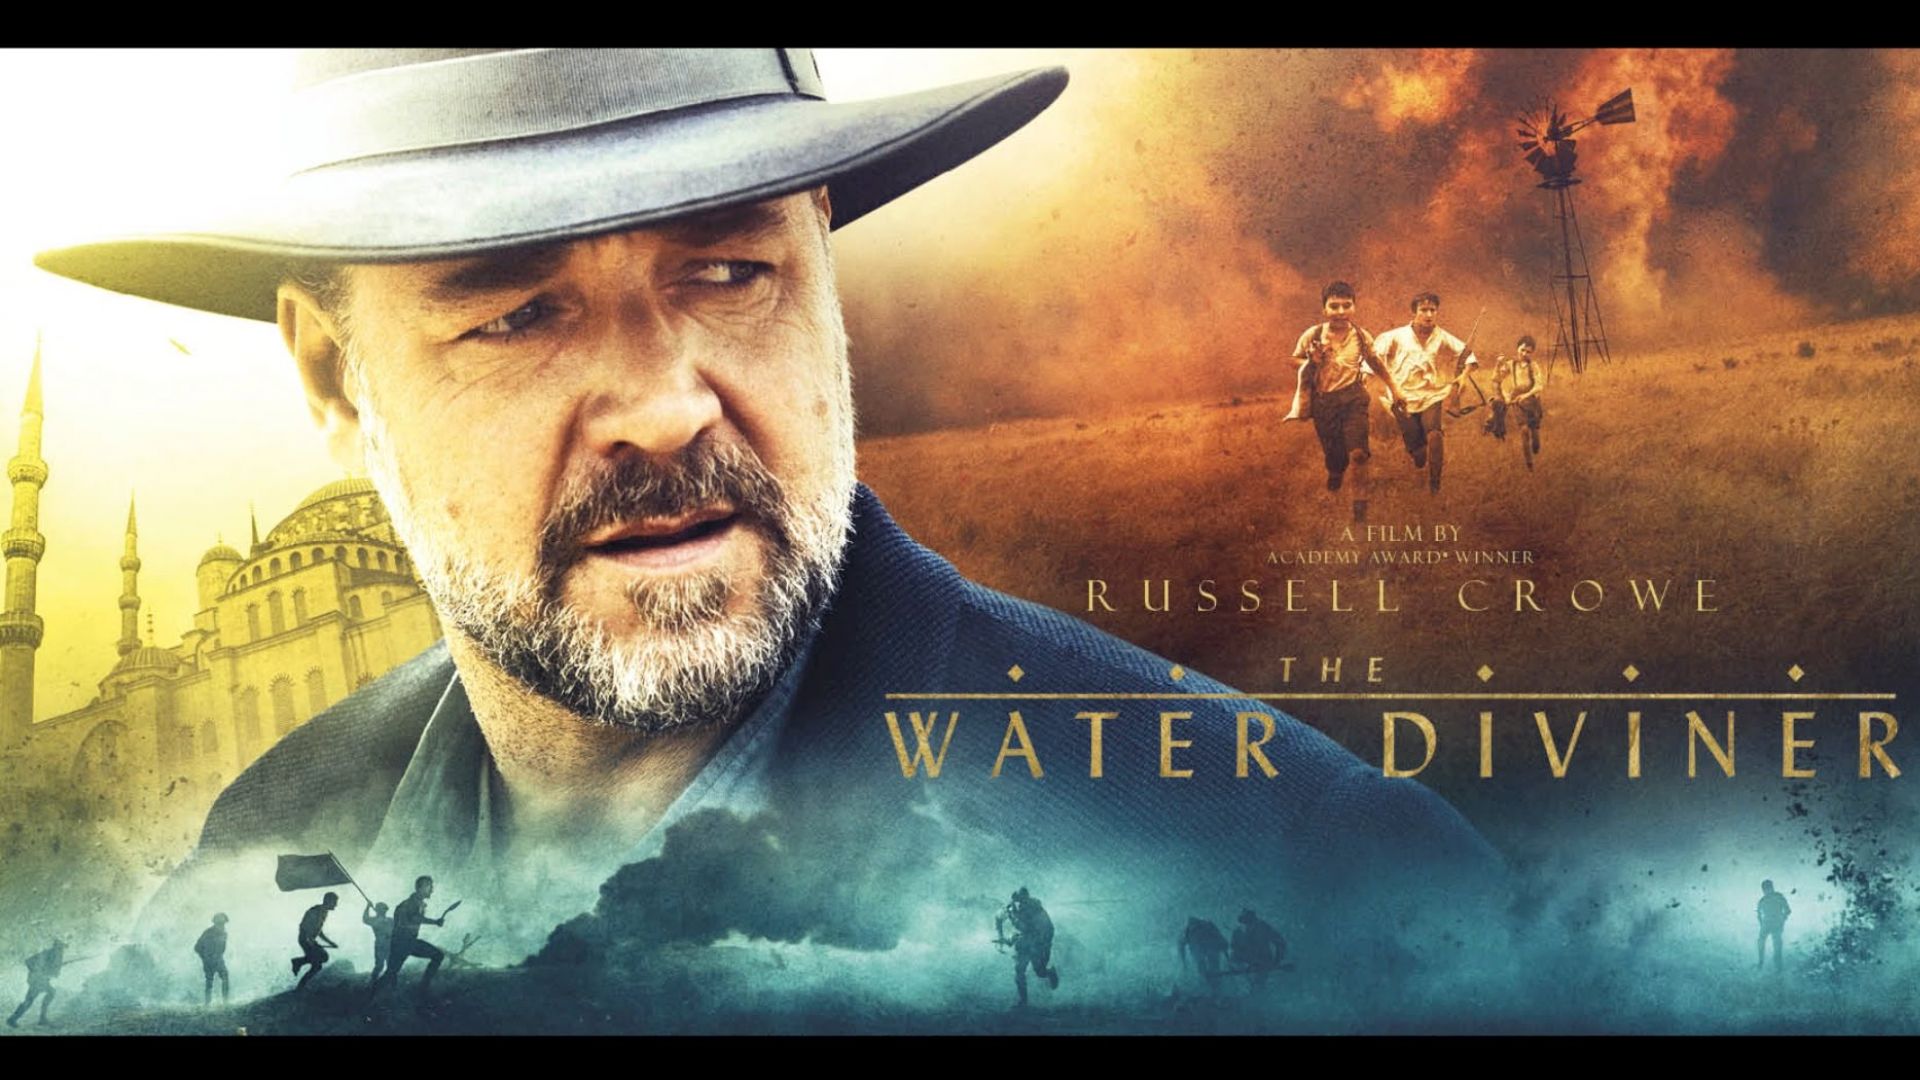 6. The Water Diviner